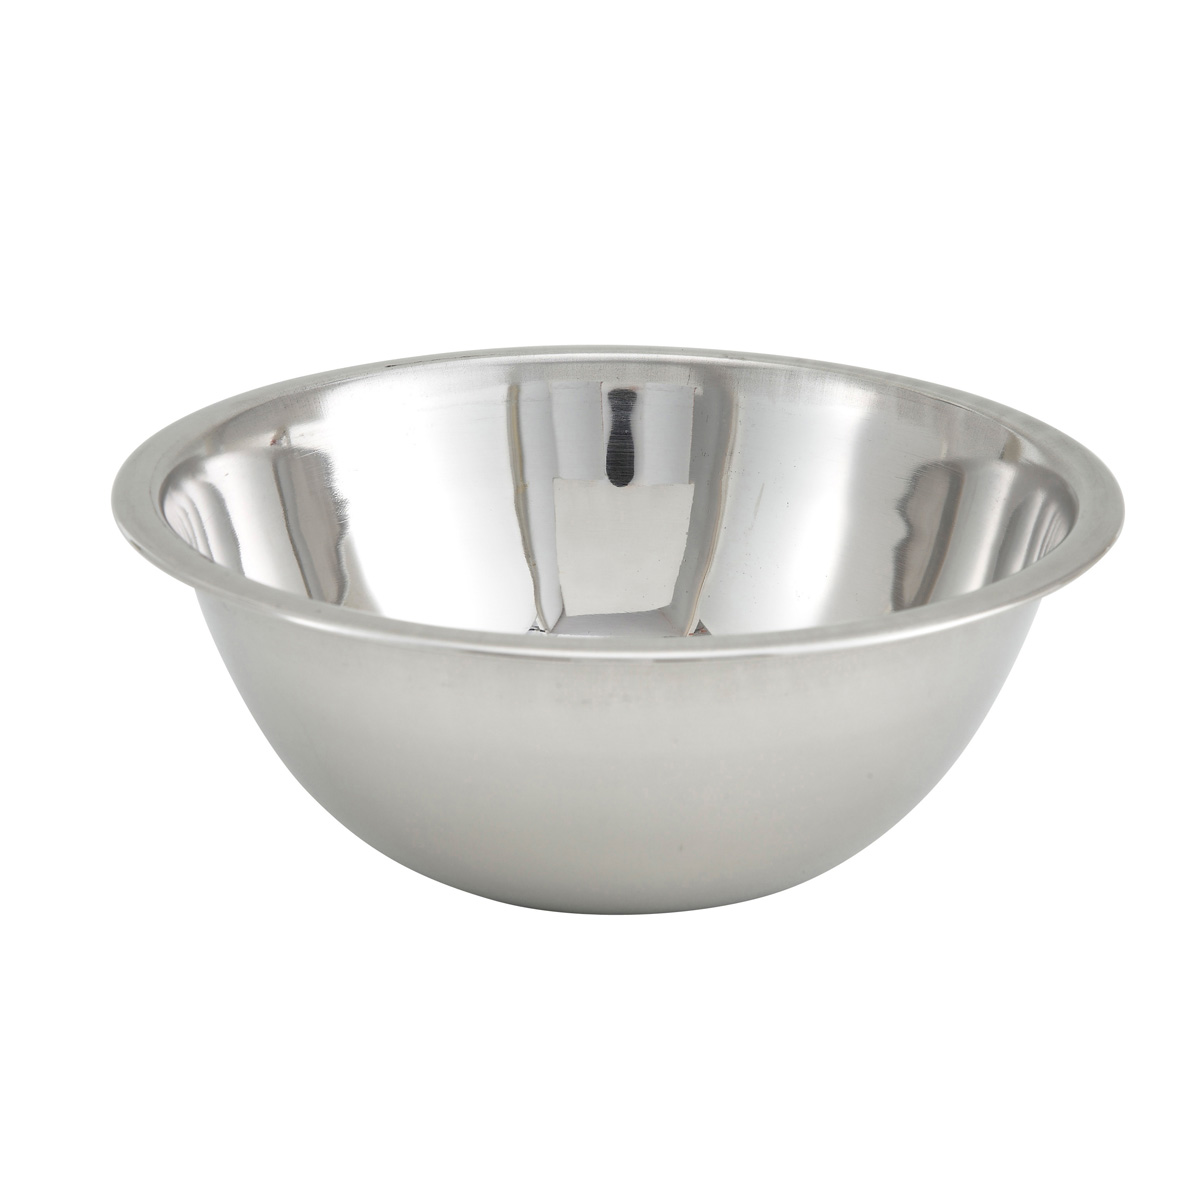 Winco MXBT-300Q 3 quarts, 10-1/4" dia, 3-5/8"H Stainless Steel Mixing Bowl